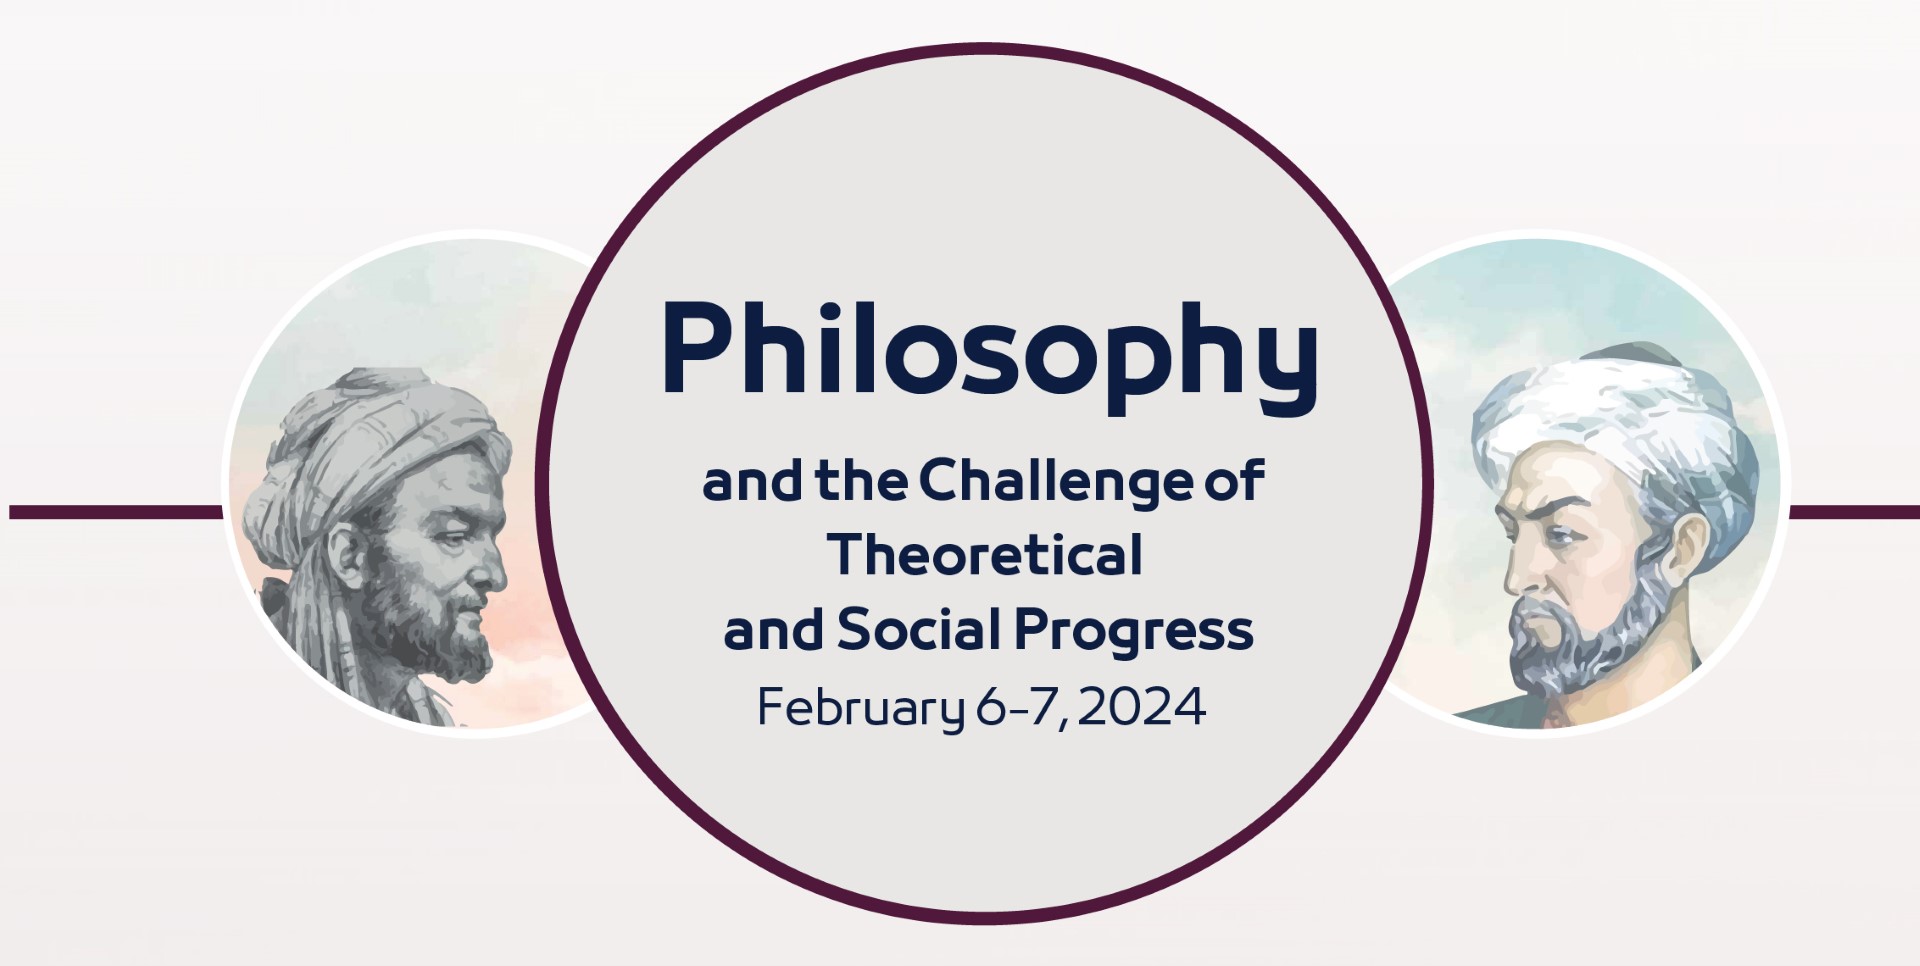 Philosophy and the challenge of Theoretical and Social Progress